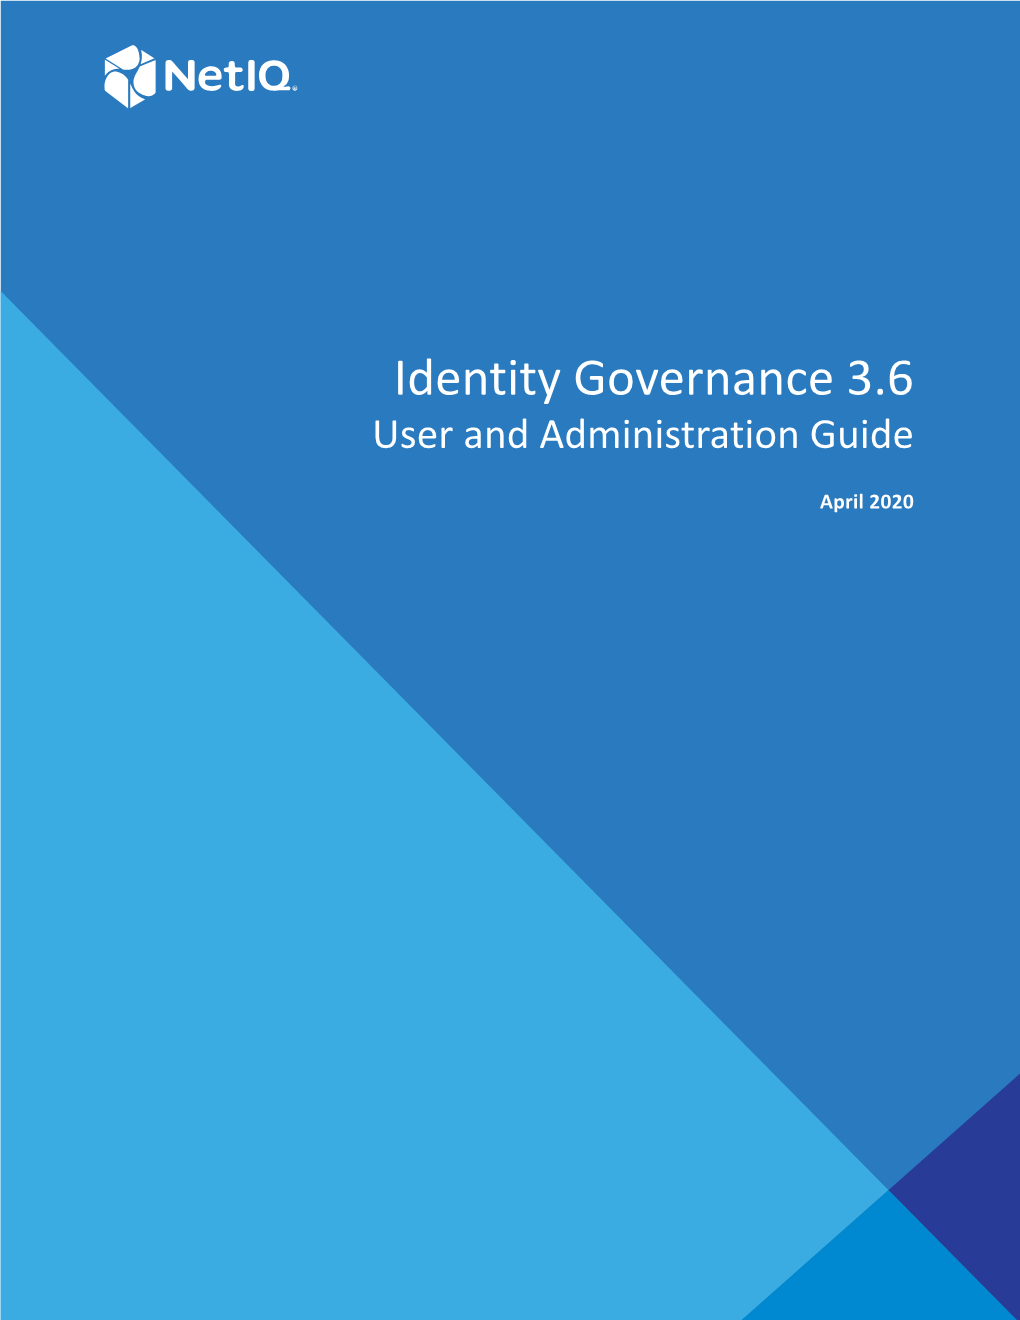 Identity Governance 3.6 User and Administration Guide